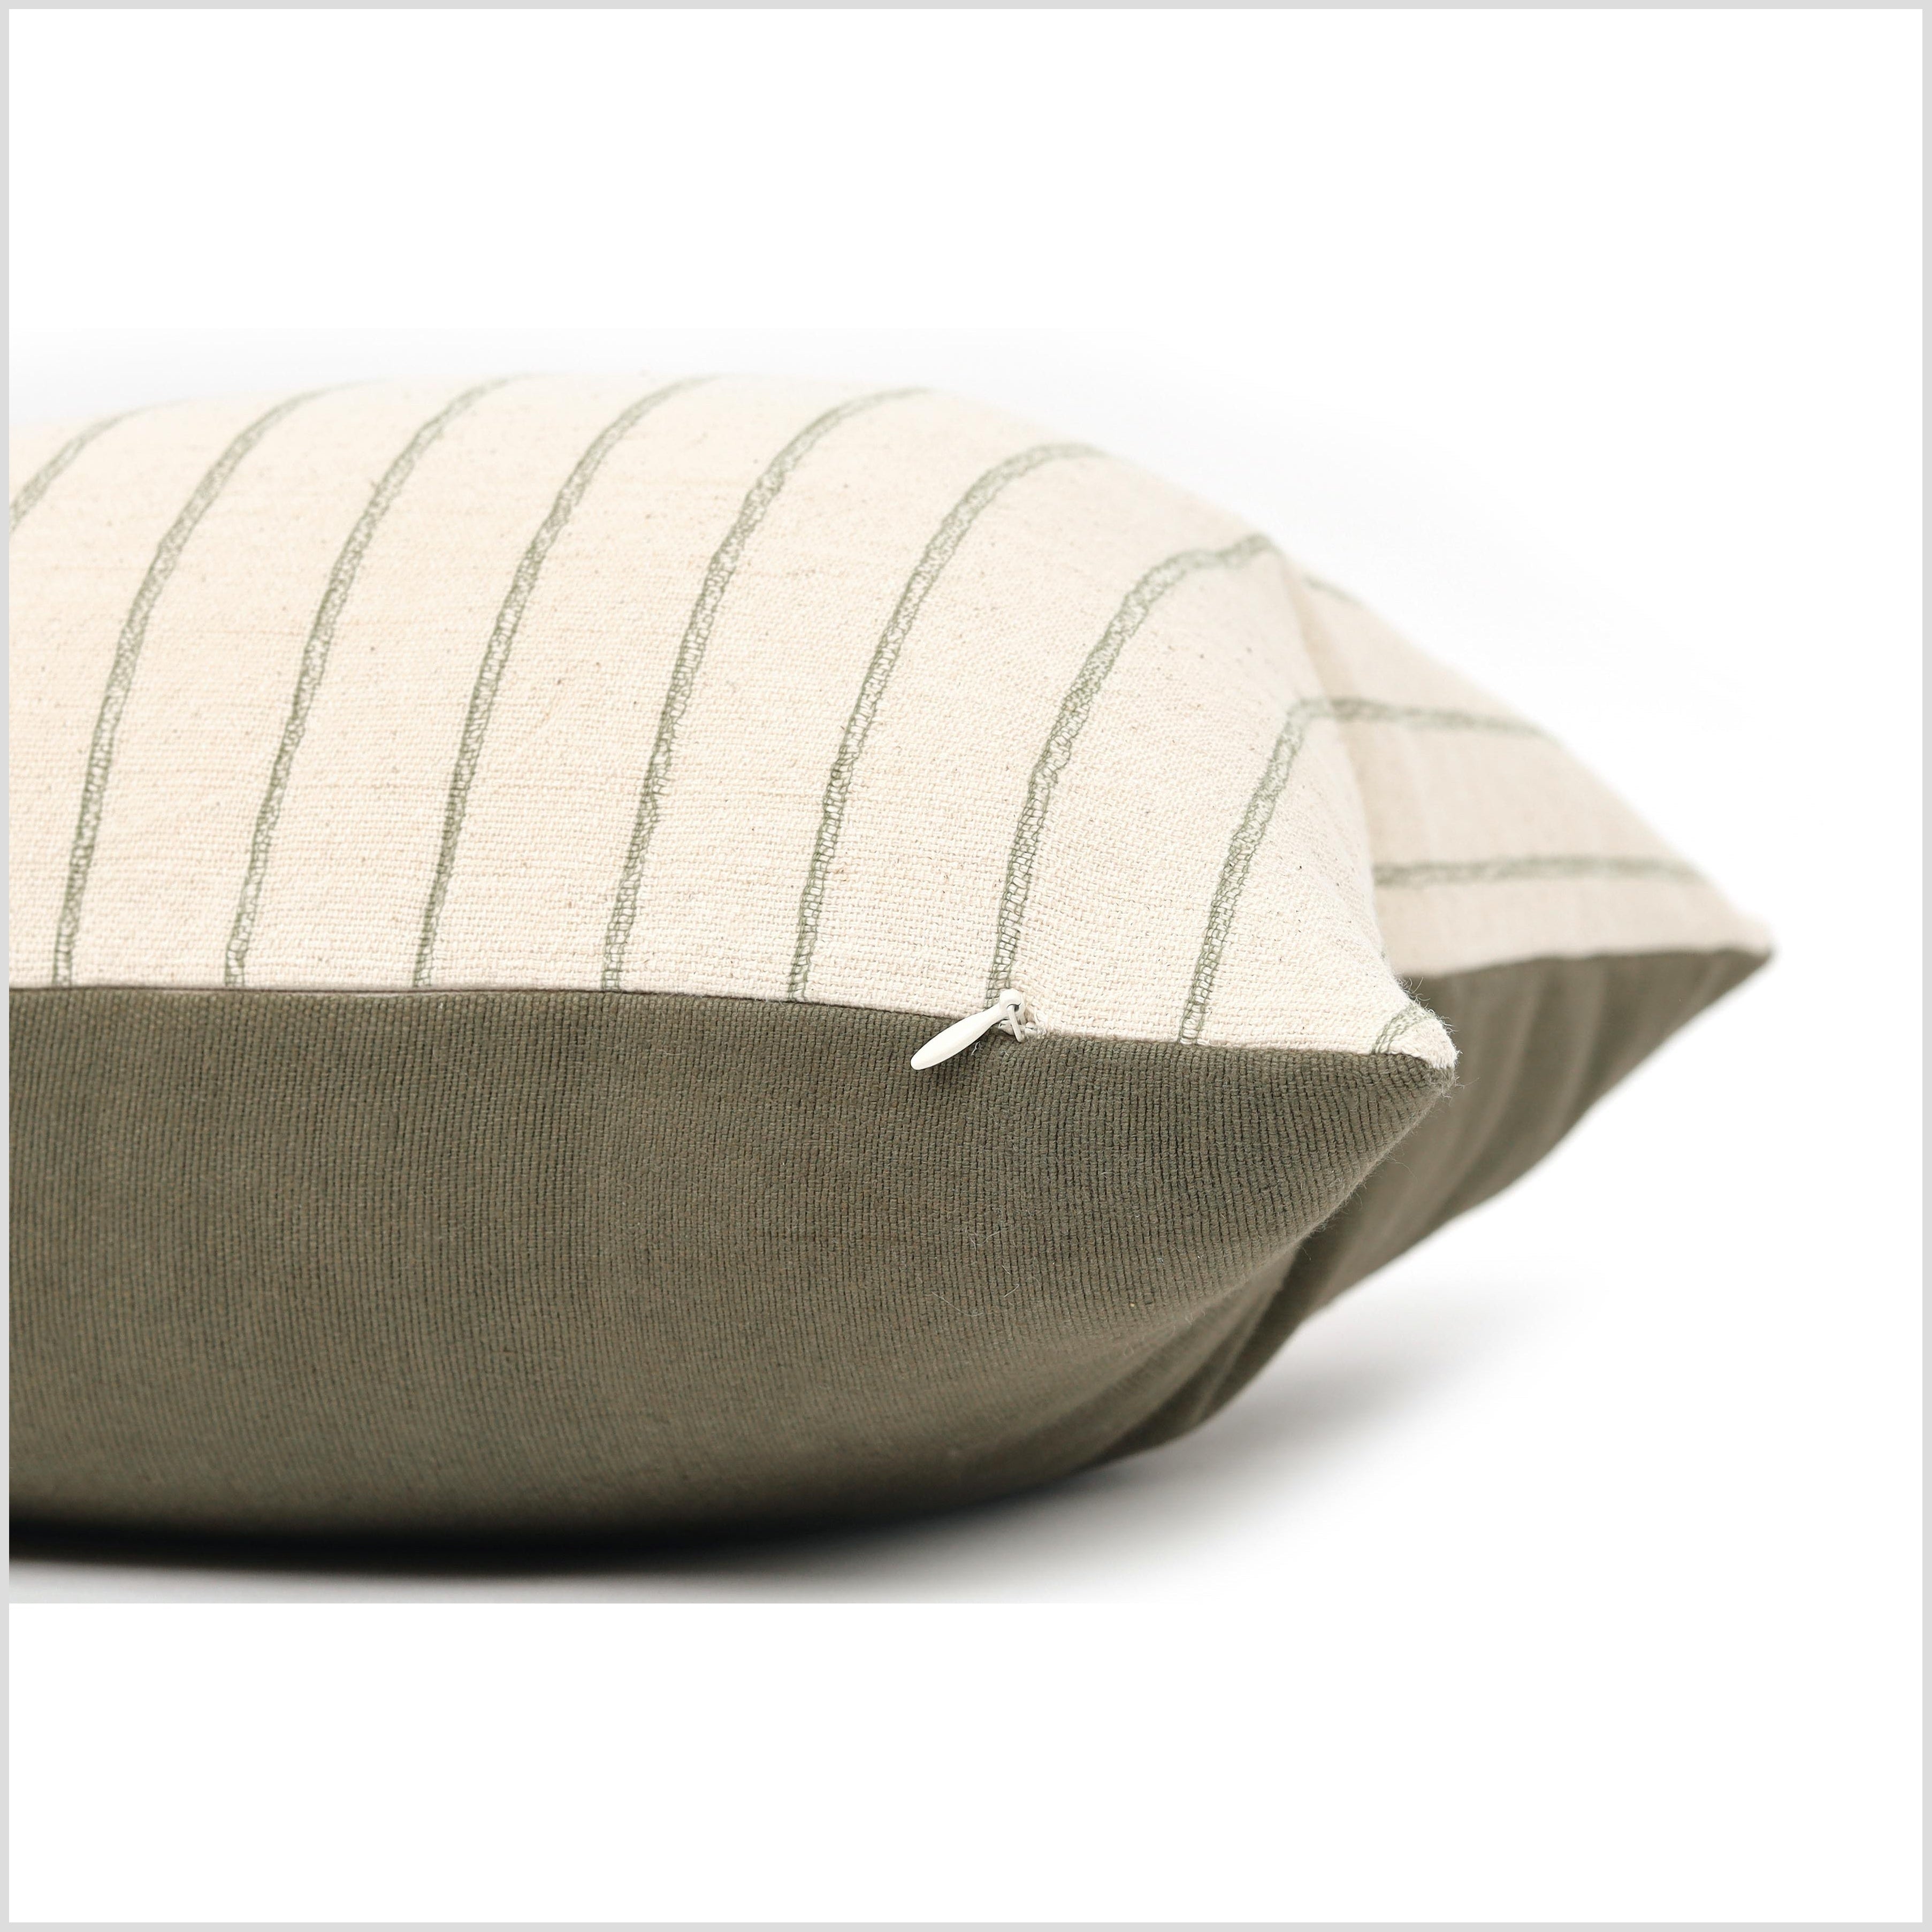 Cotton Woven Designer Lumbar Throw Pillow Covers Olive Green / Cream White,  12 x 20 inches | Oblong Small Rectangular Pillow Cases Set of 2